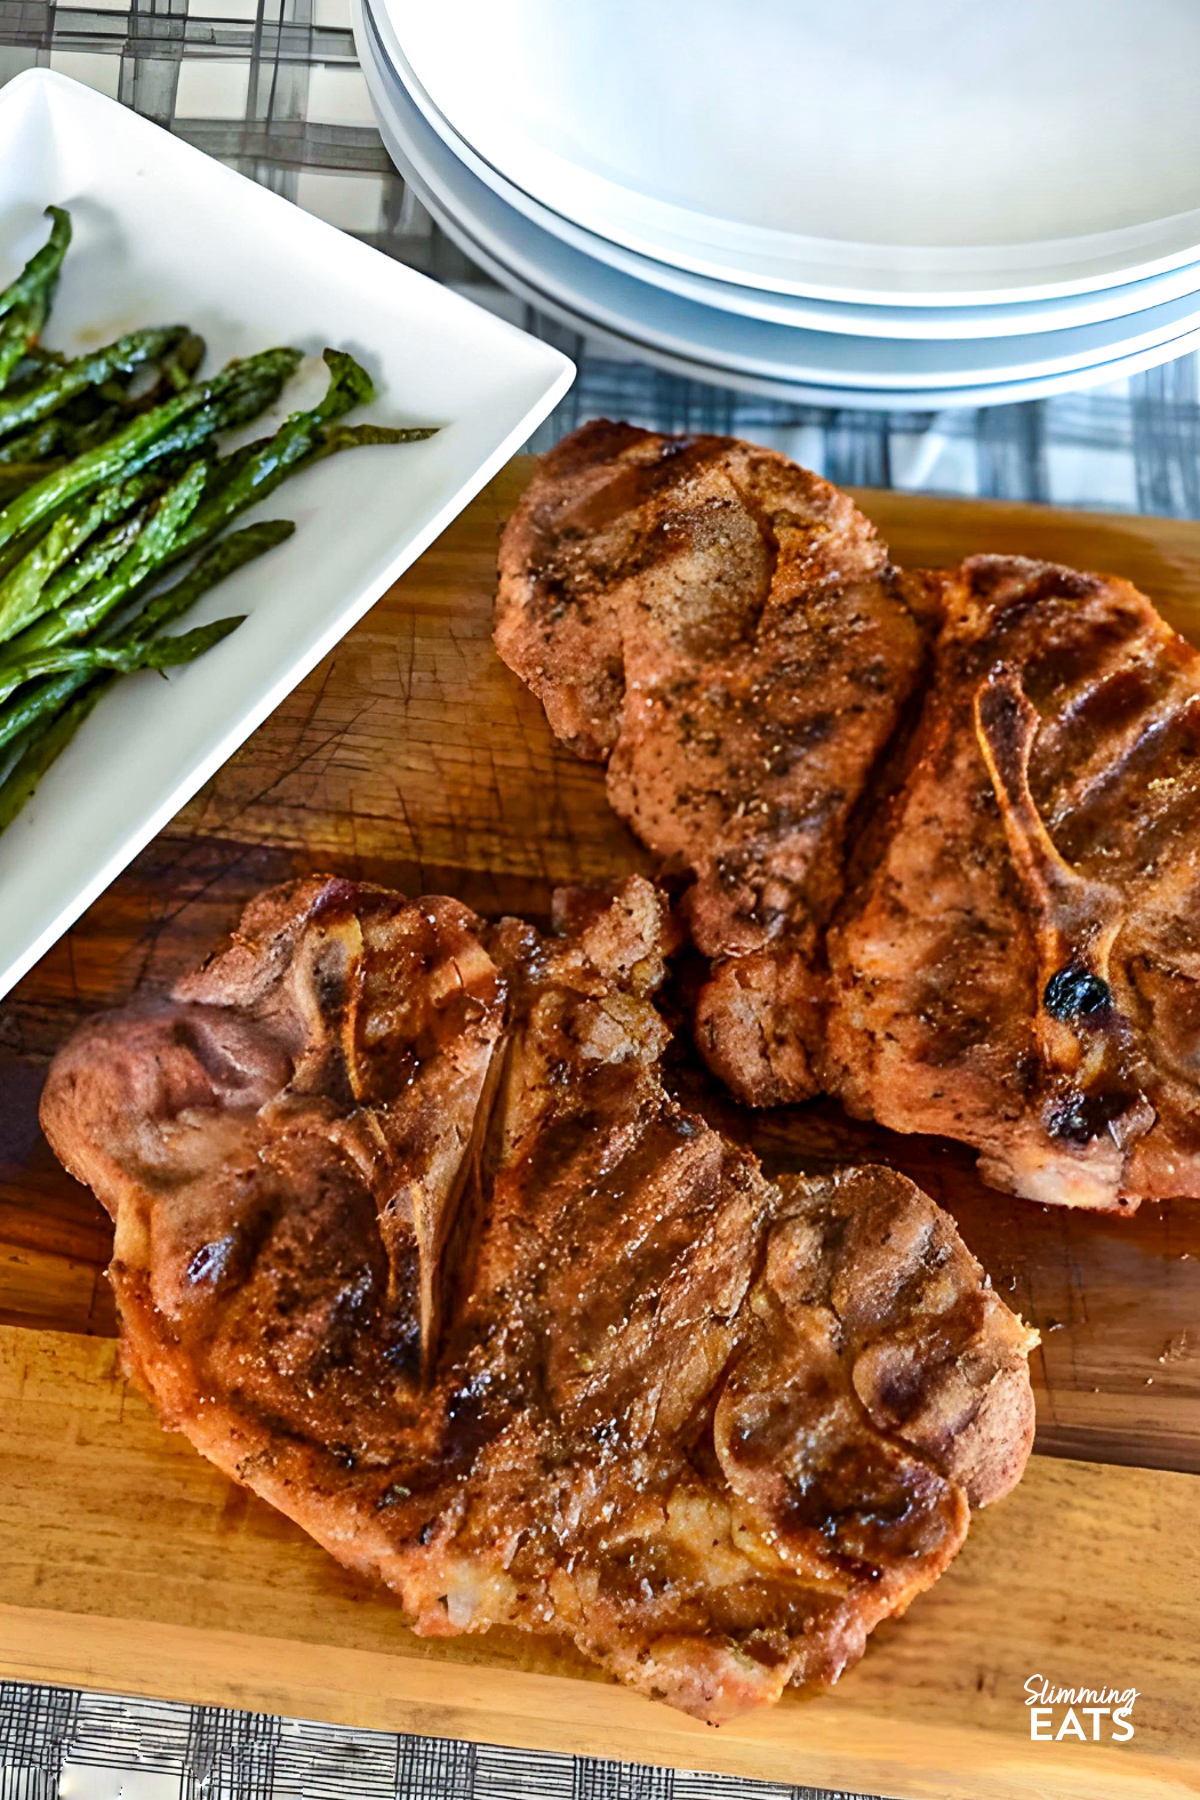 Grilled BBQ pork chops served on a wooden board, with white plates in the background showcasing a side of asparagus.